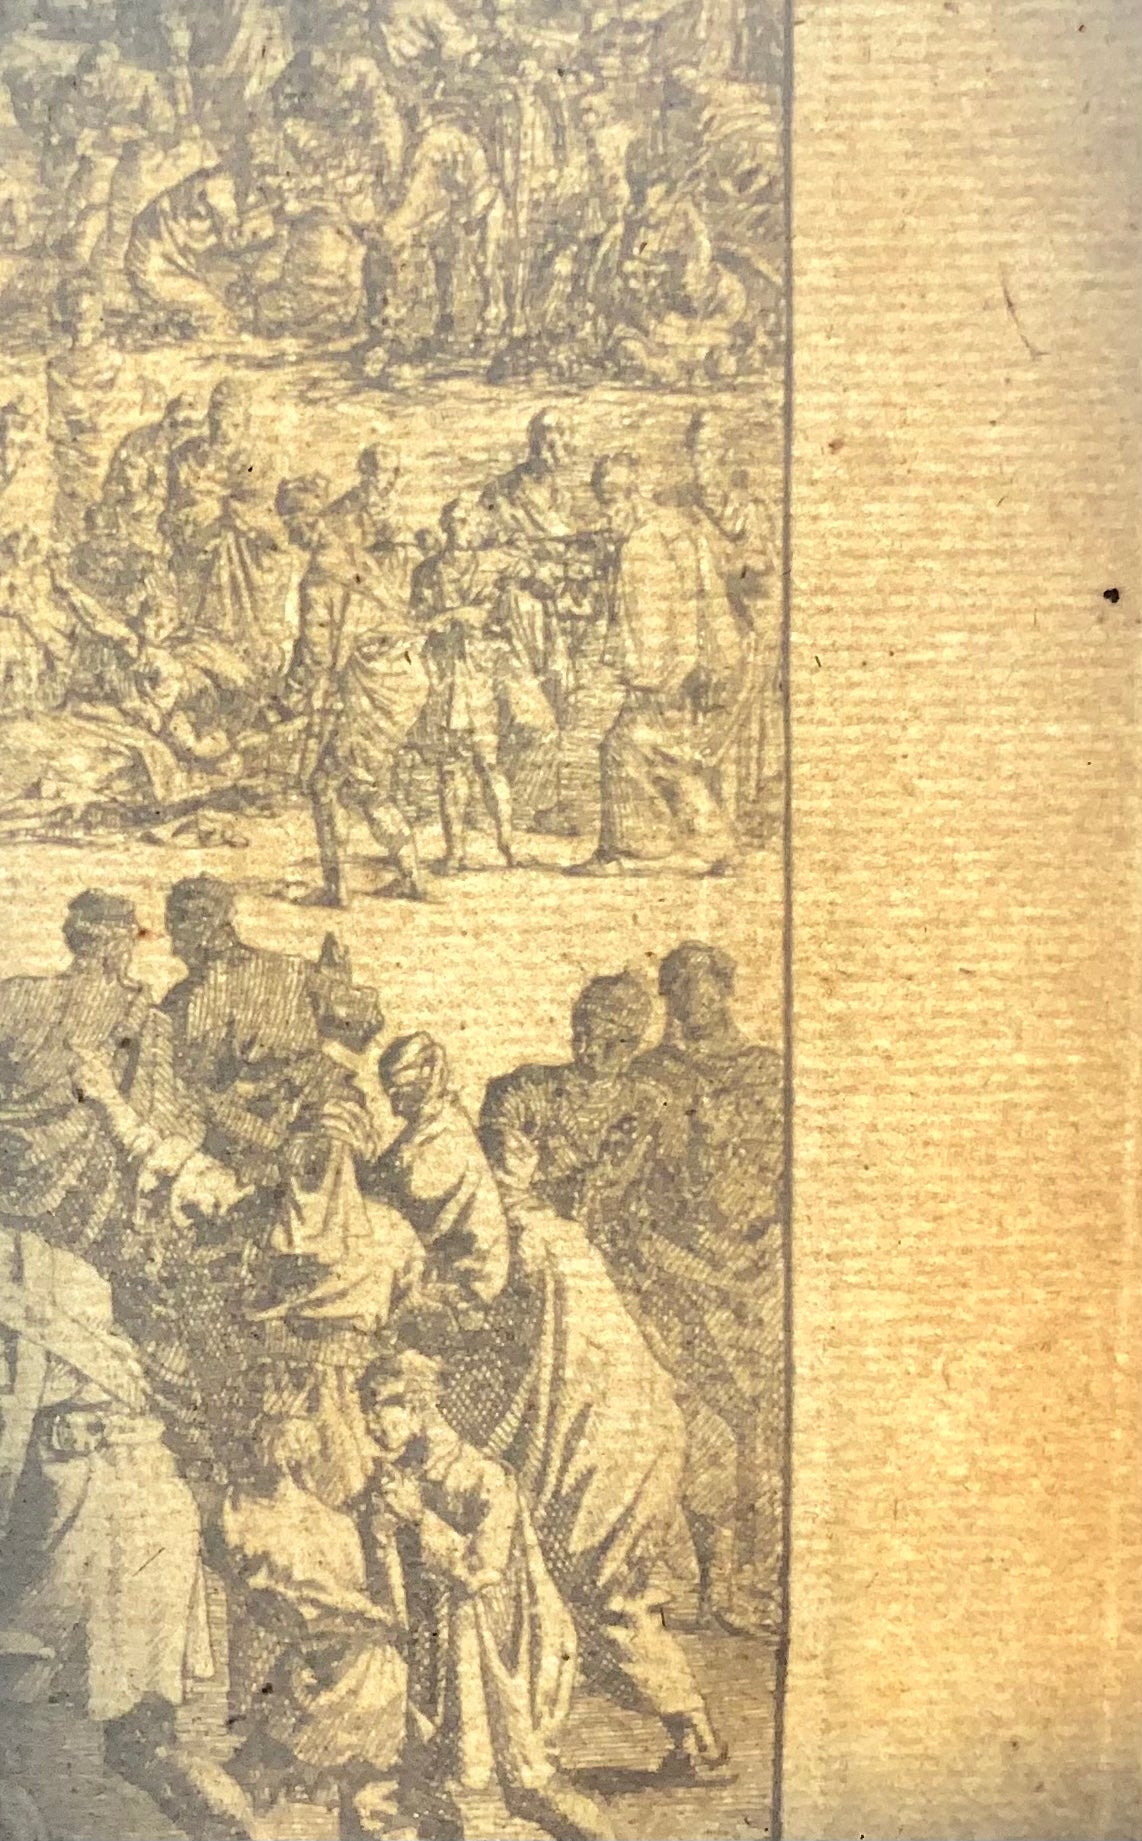 1708 Christ guérit les malades, Jean. Luyken, bible, grand in-folio double page 52,8 cm